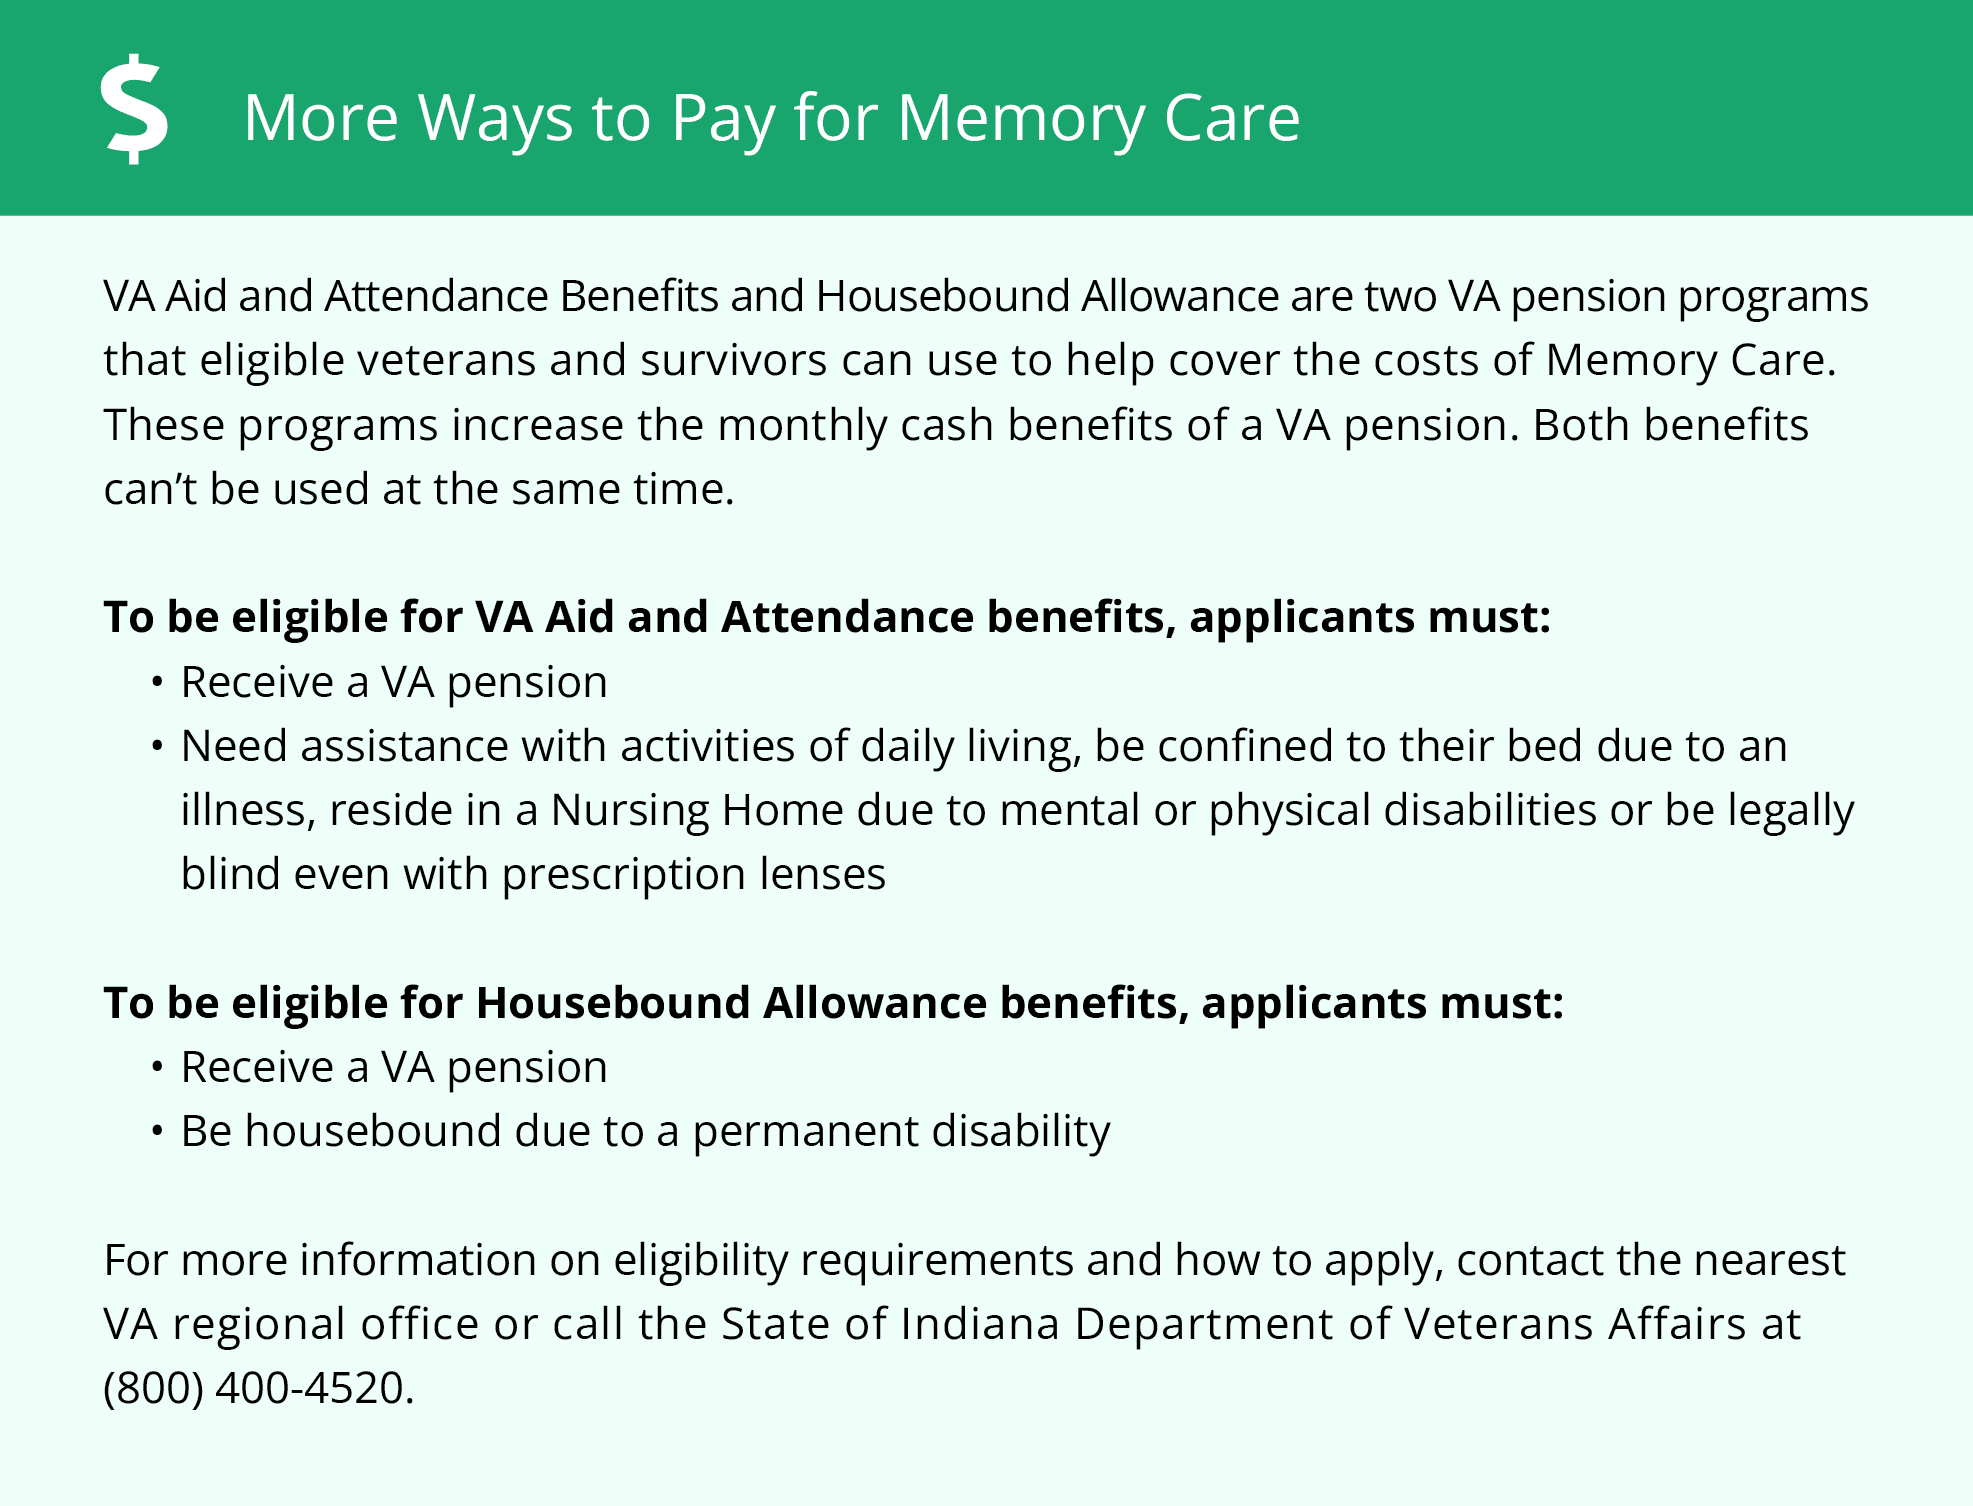 More ways to pay for memory care in Indiana